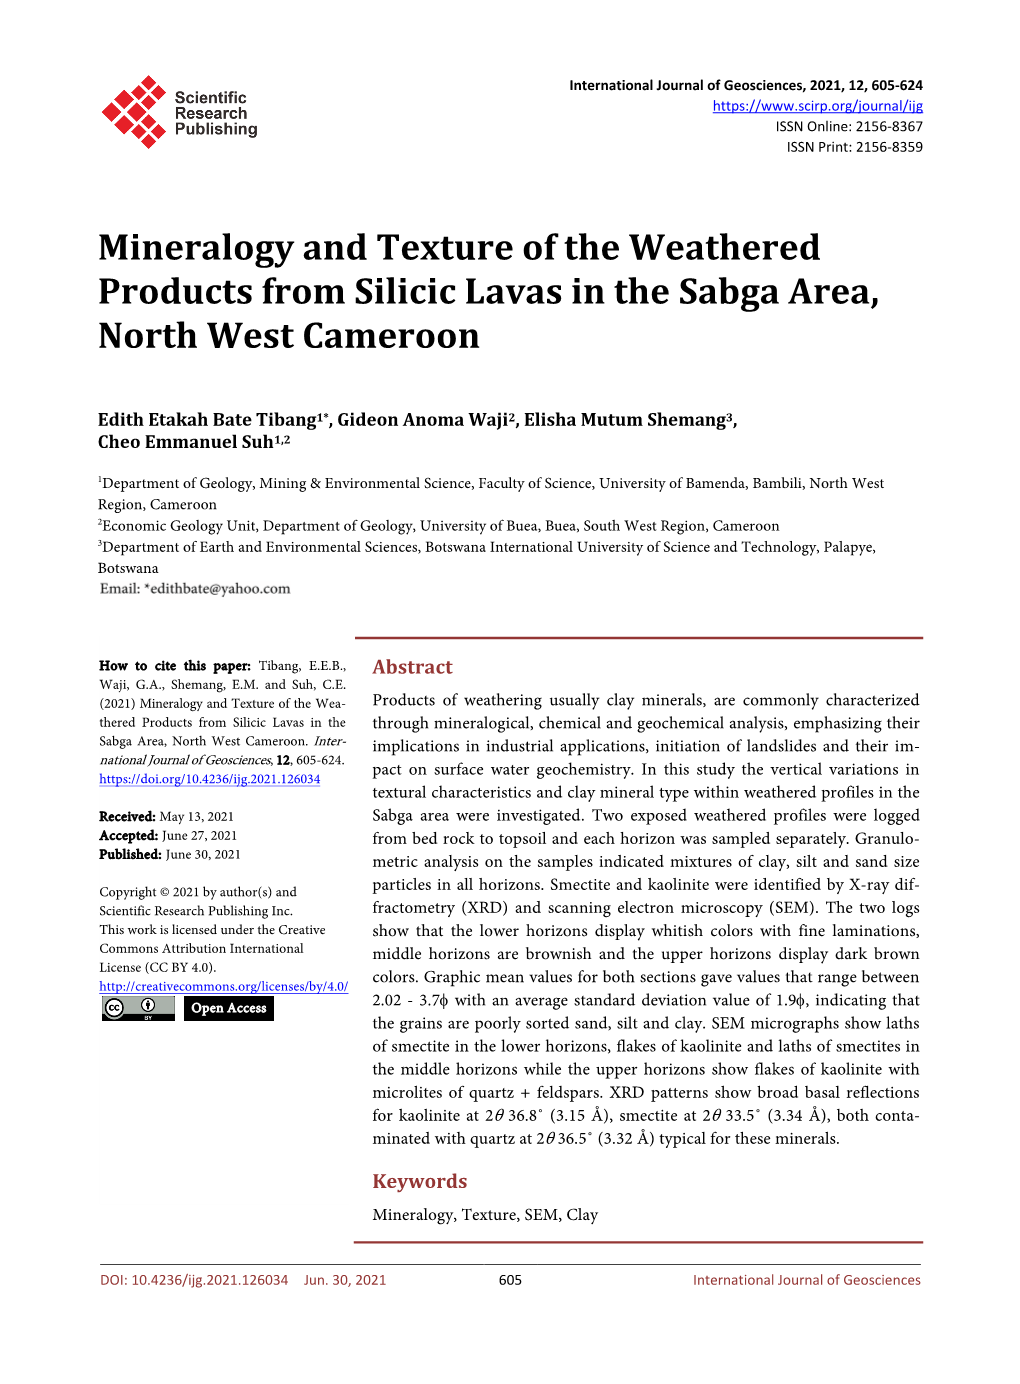 Mineralogy and Texture of the Weathered Products from Silicic Lavas in the Sabga Area, North West Cameroon